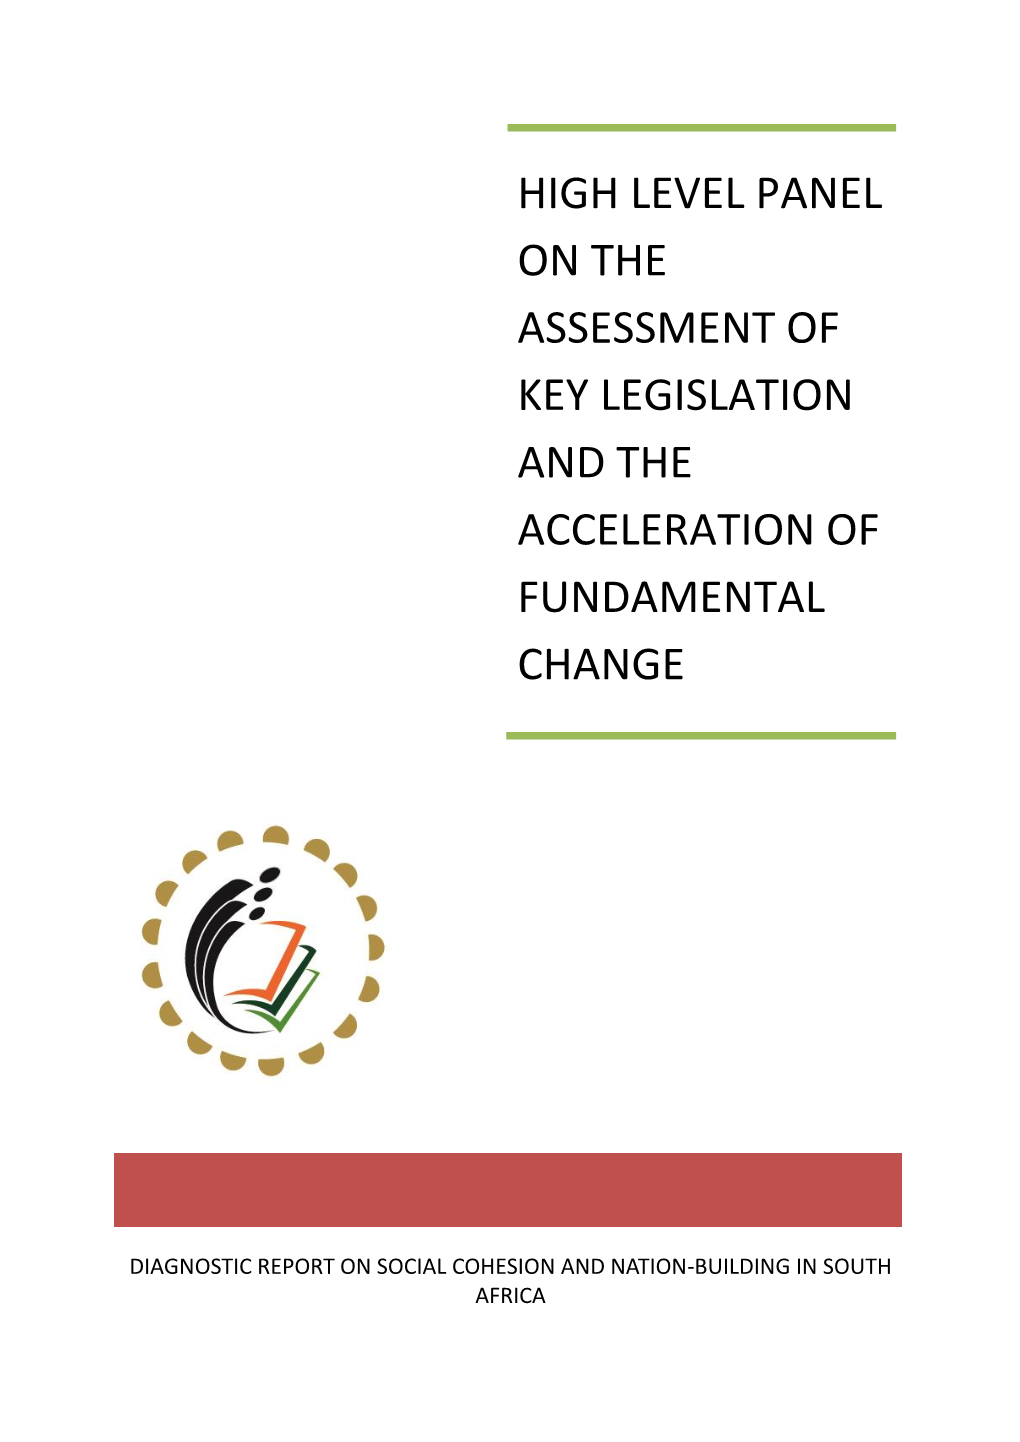 High Level Panel on the Assessment of Key Legislation and the Acceleration of Fundamental Change